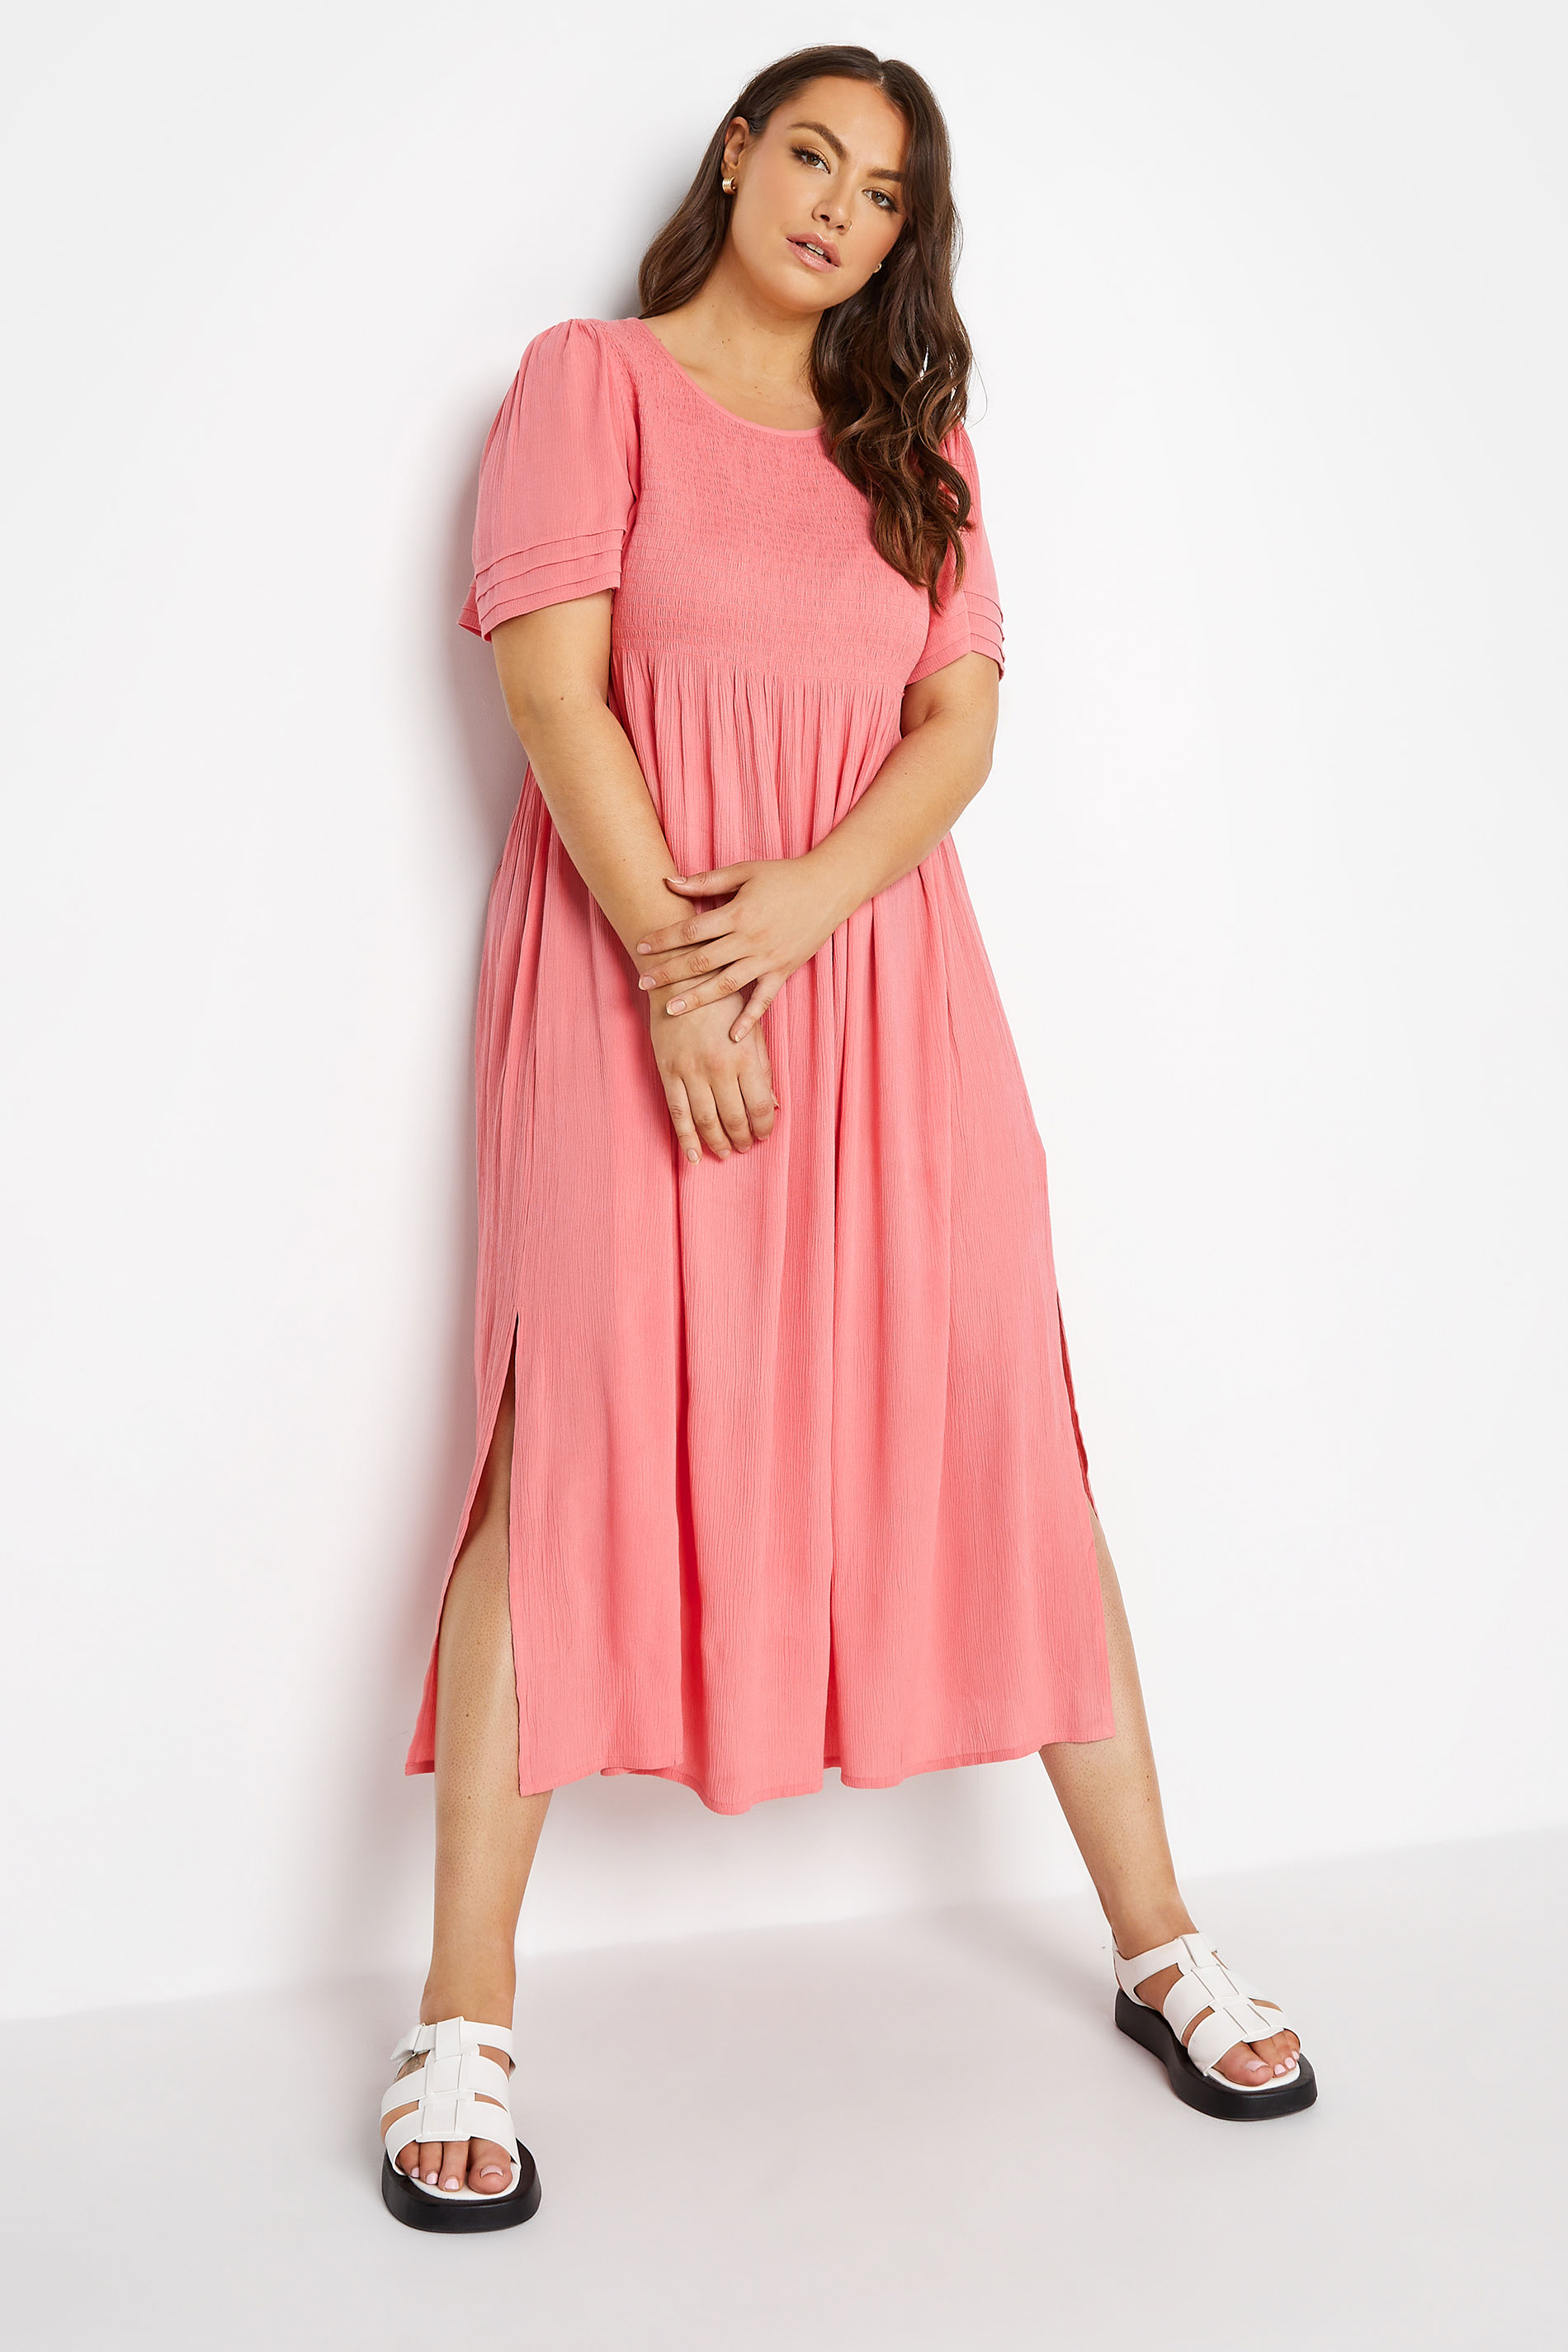 Robes Grande Taille Grande taille  Robes dÉté | LIMITED COLLECTION - Robe Rose Corail Manches Amples - DK42265